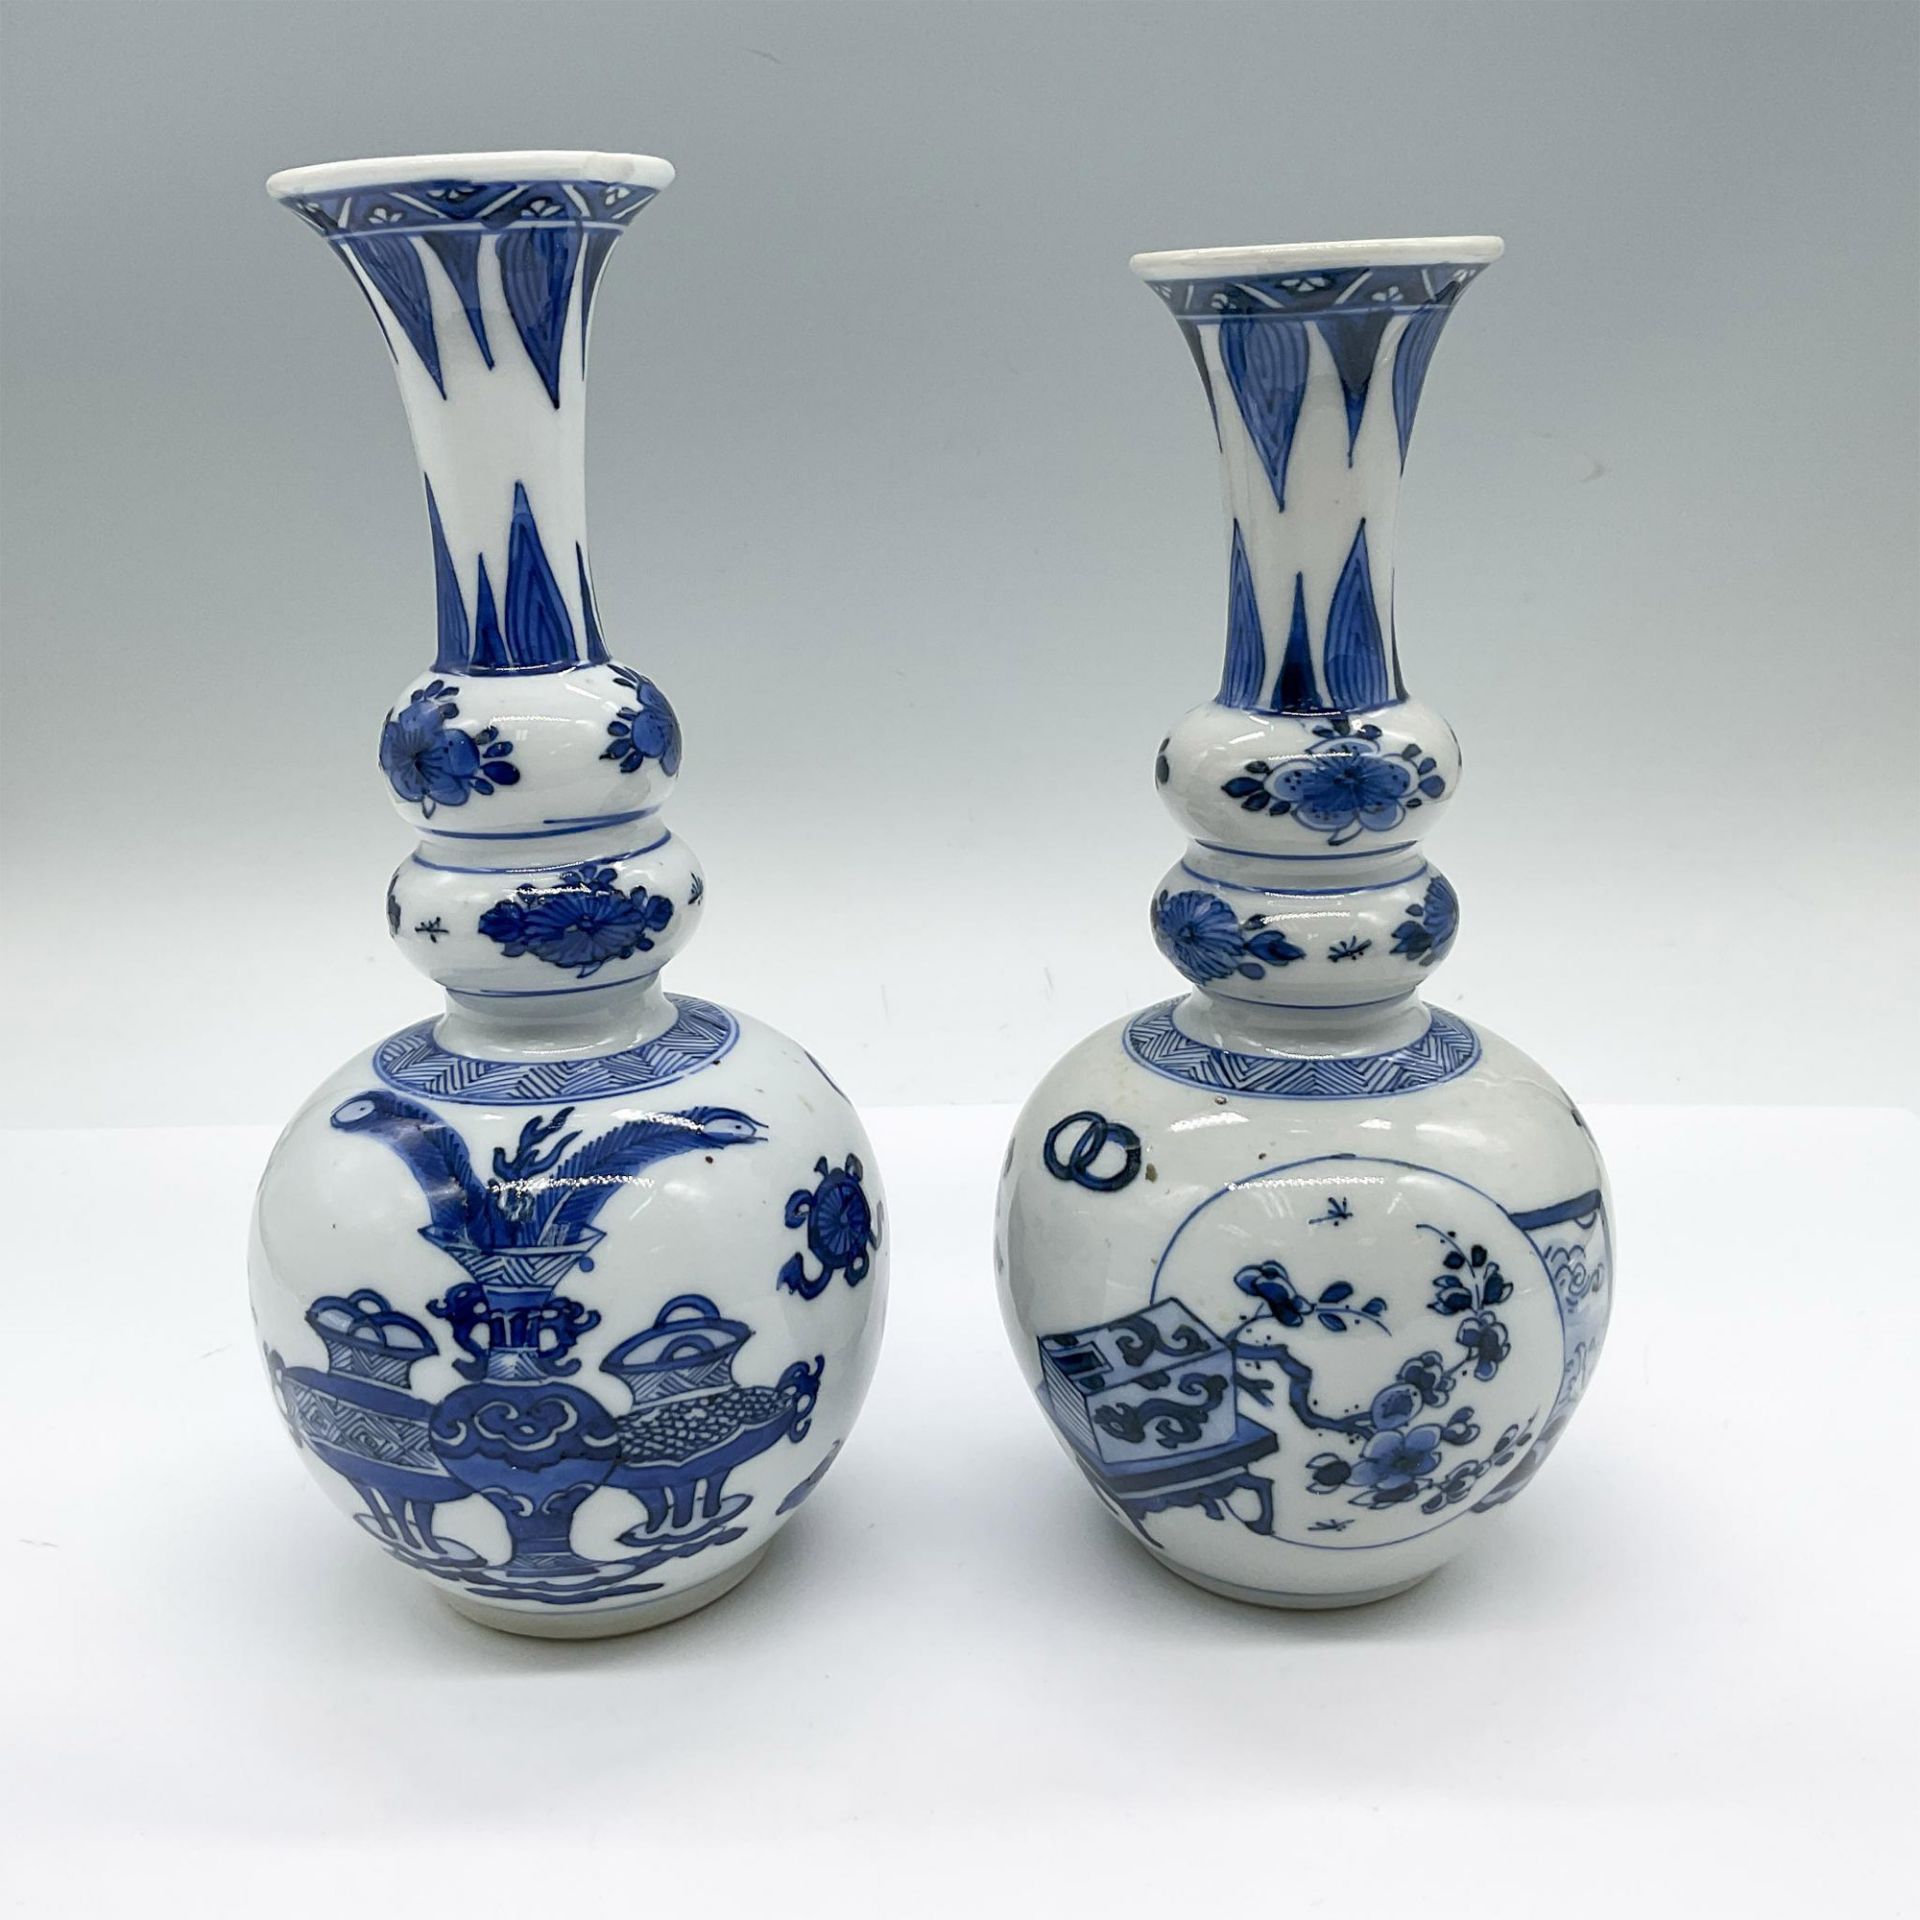 Pair of Chinese Blue and White Porcelain Vases - Image 3 of 5